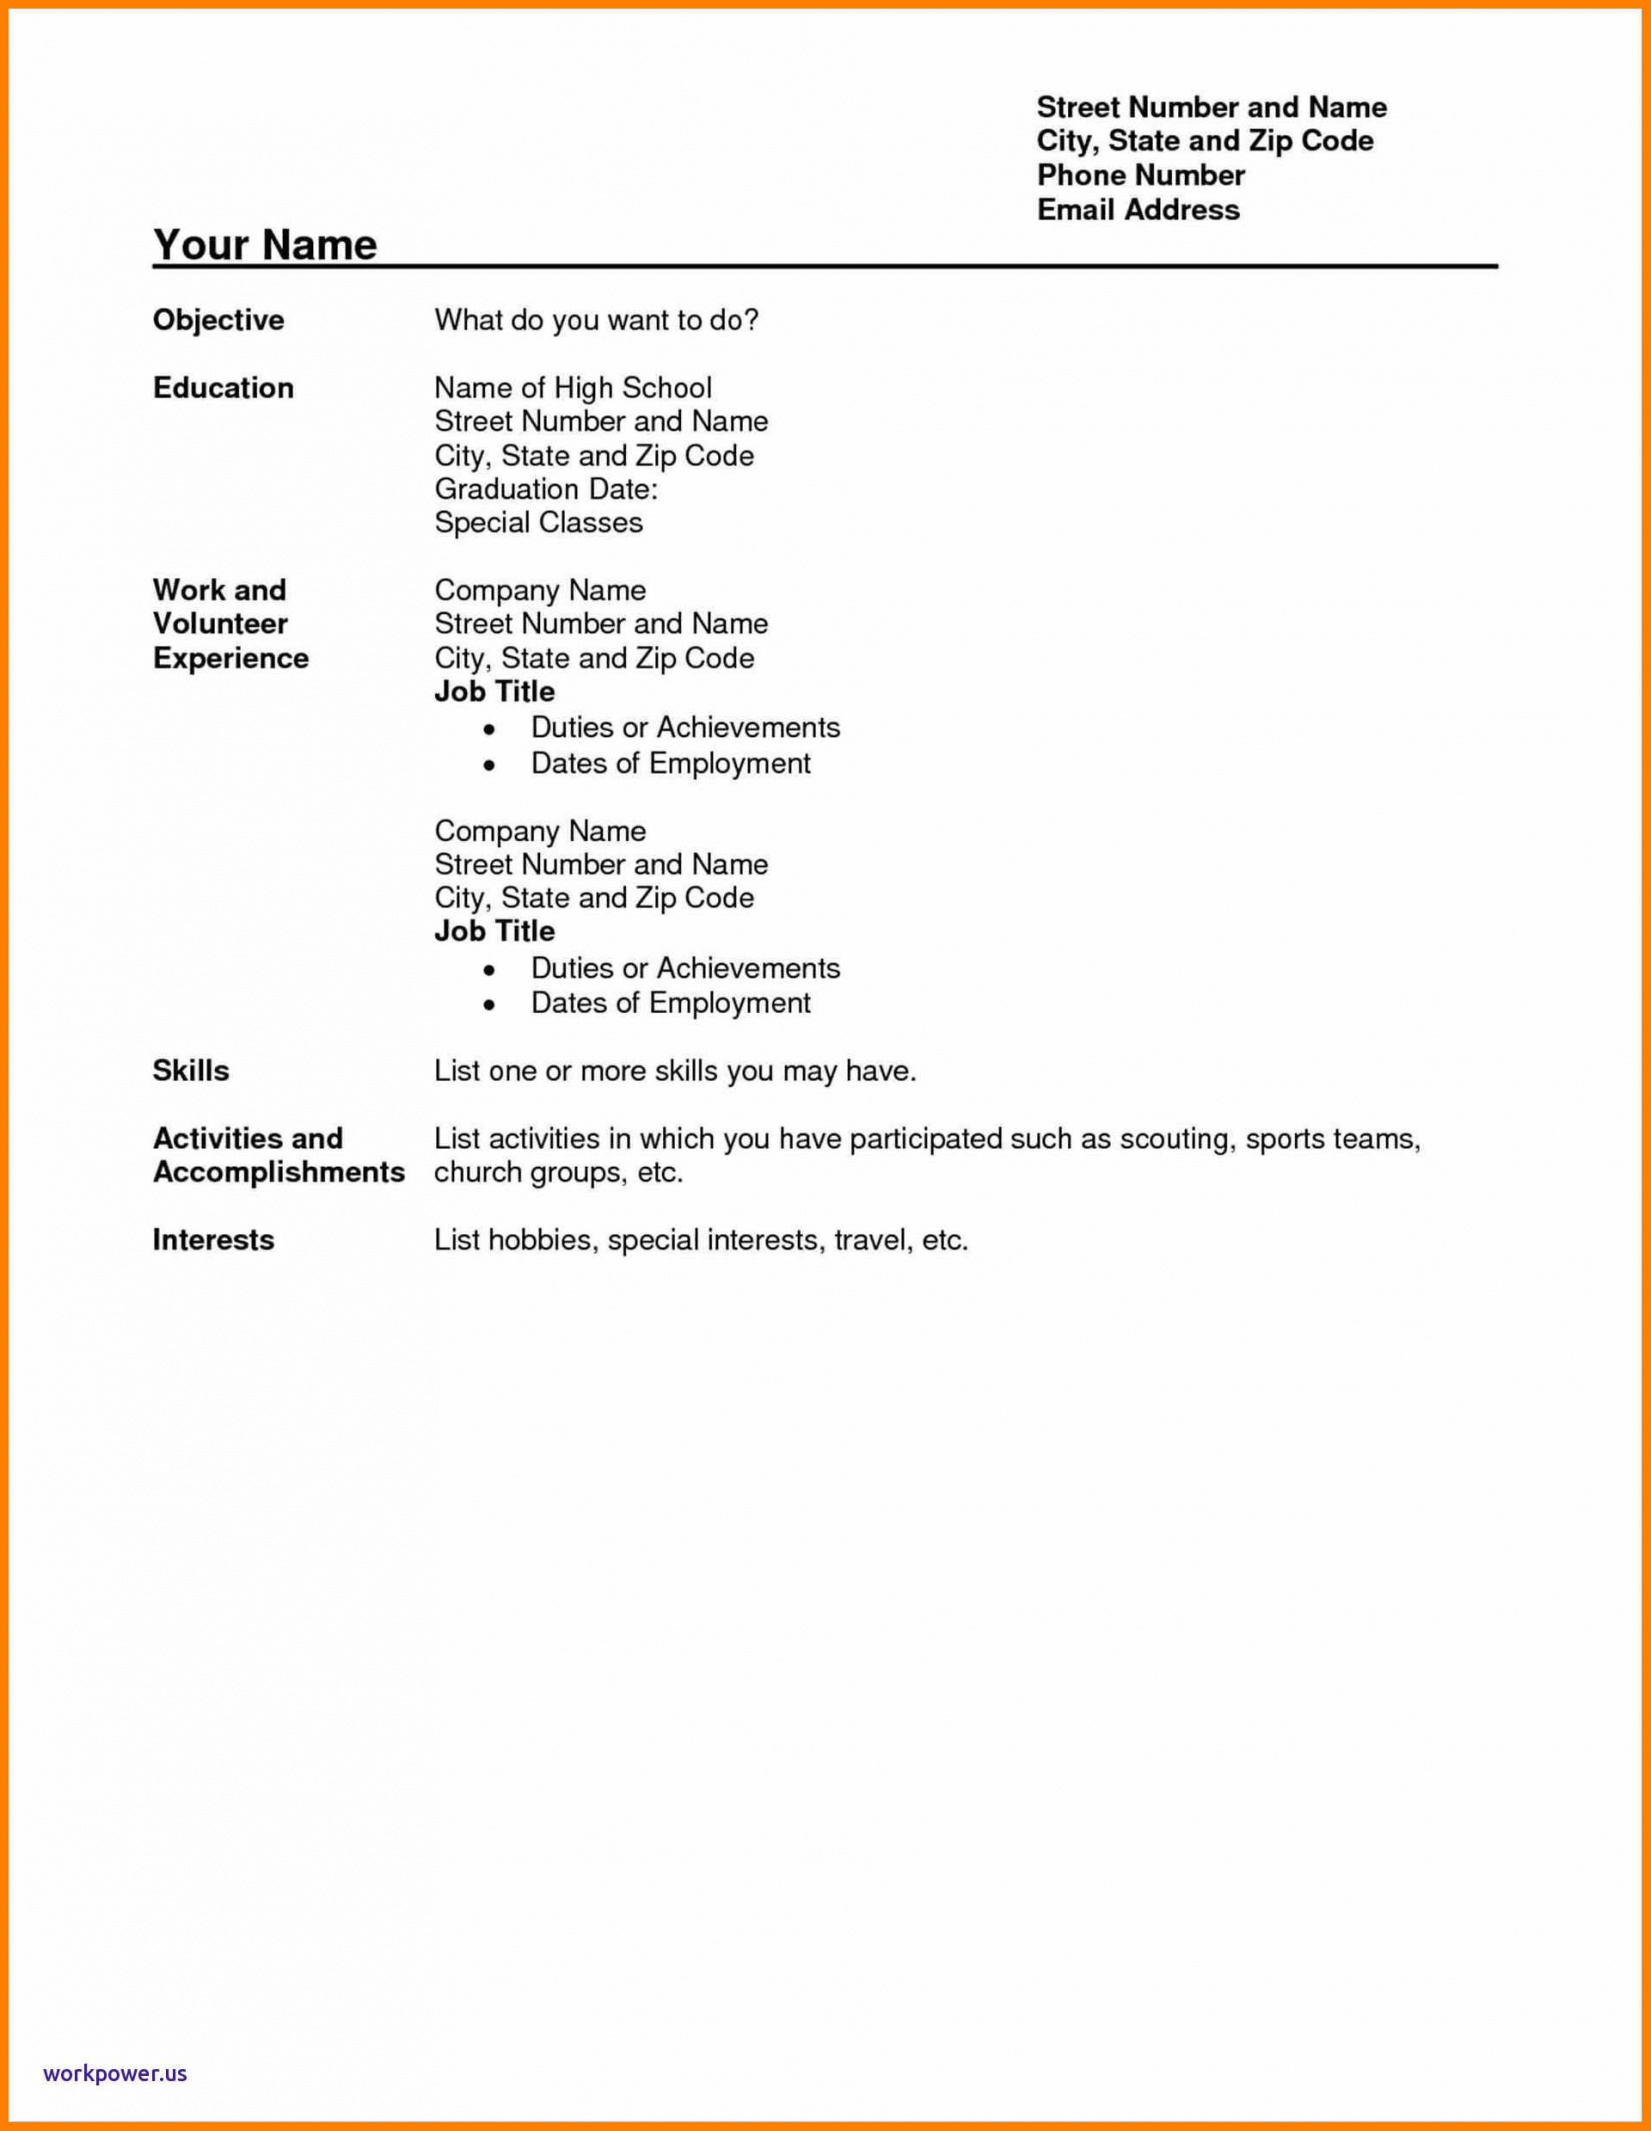 High School Student Resume High School Student Resume Template No Experience Samples With Work high school student resume|wikiresume.com